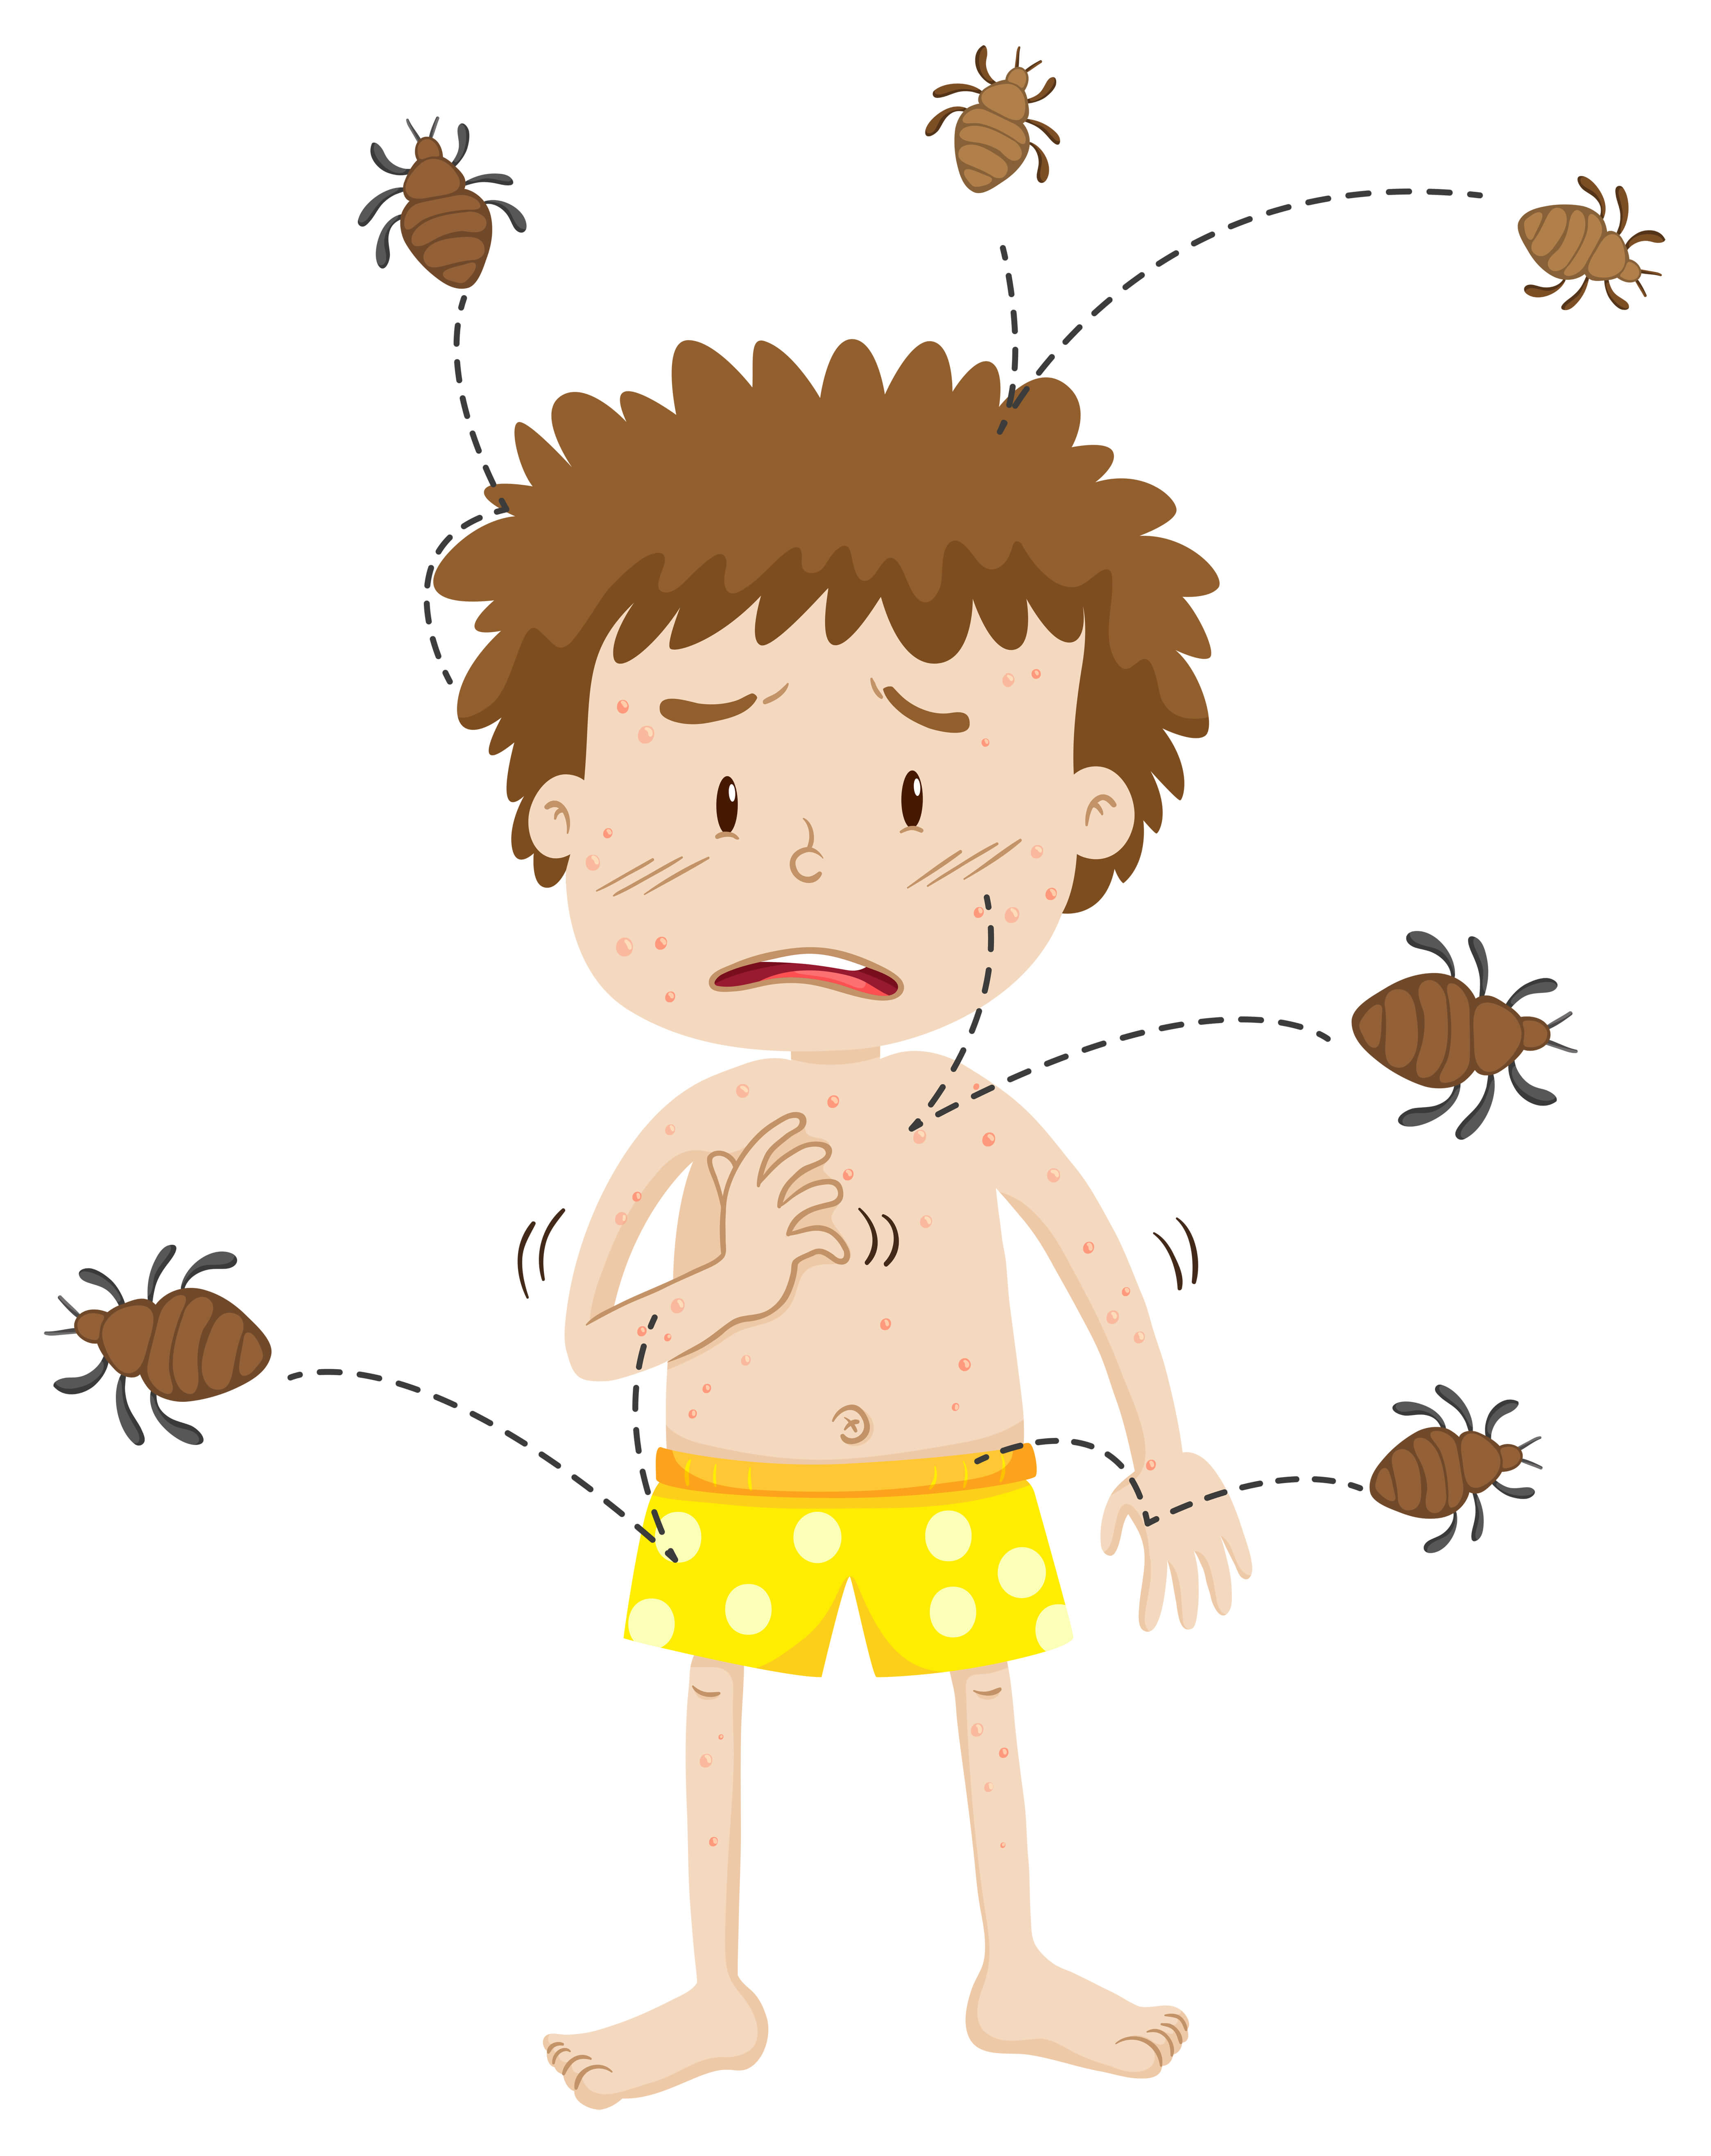 Home Remedies to get rid of bed bugs